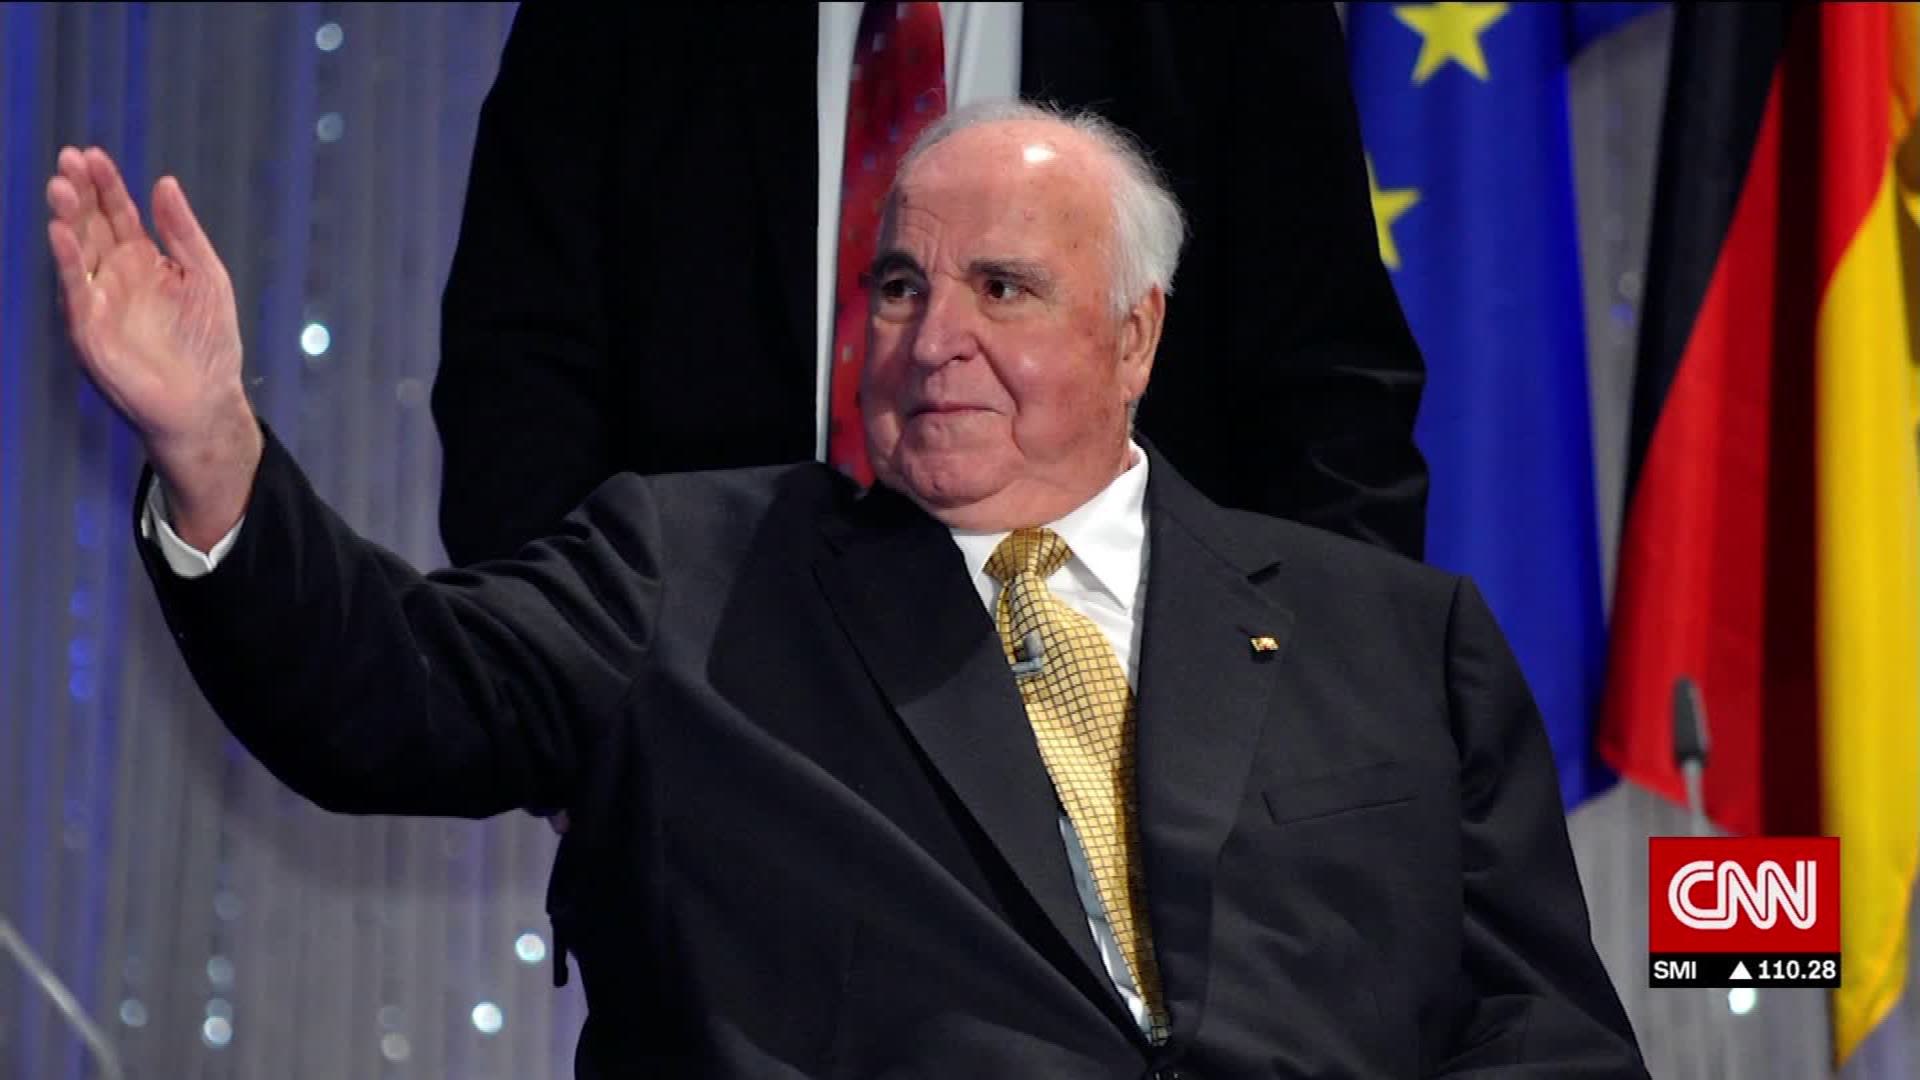 Germany's former Chancellor Kohl 'doing well' in hospital